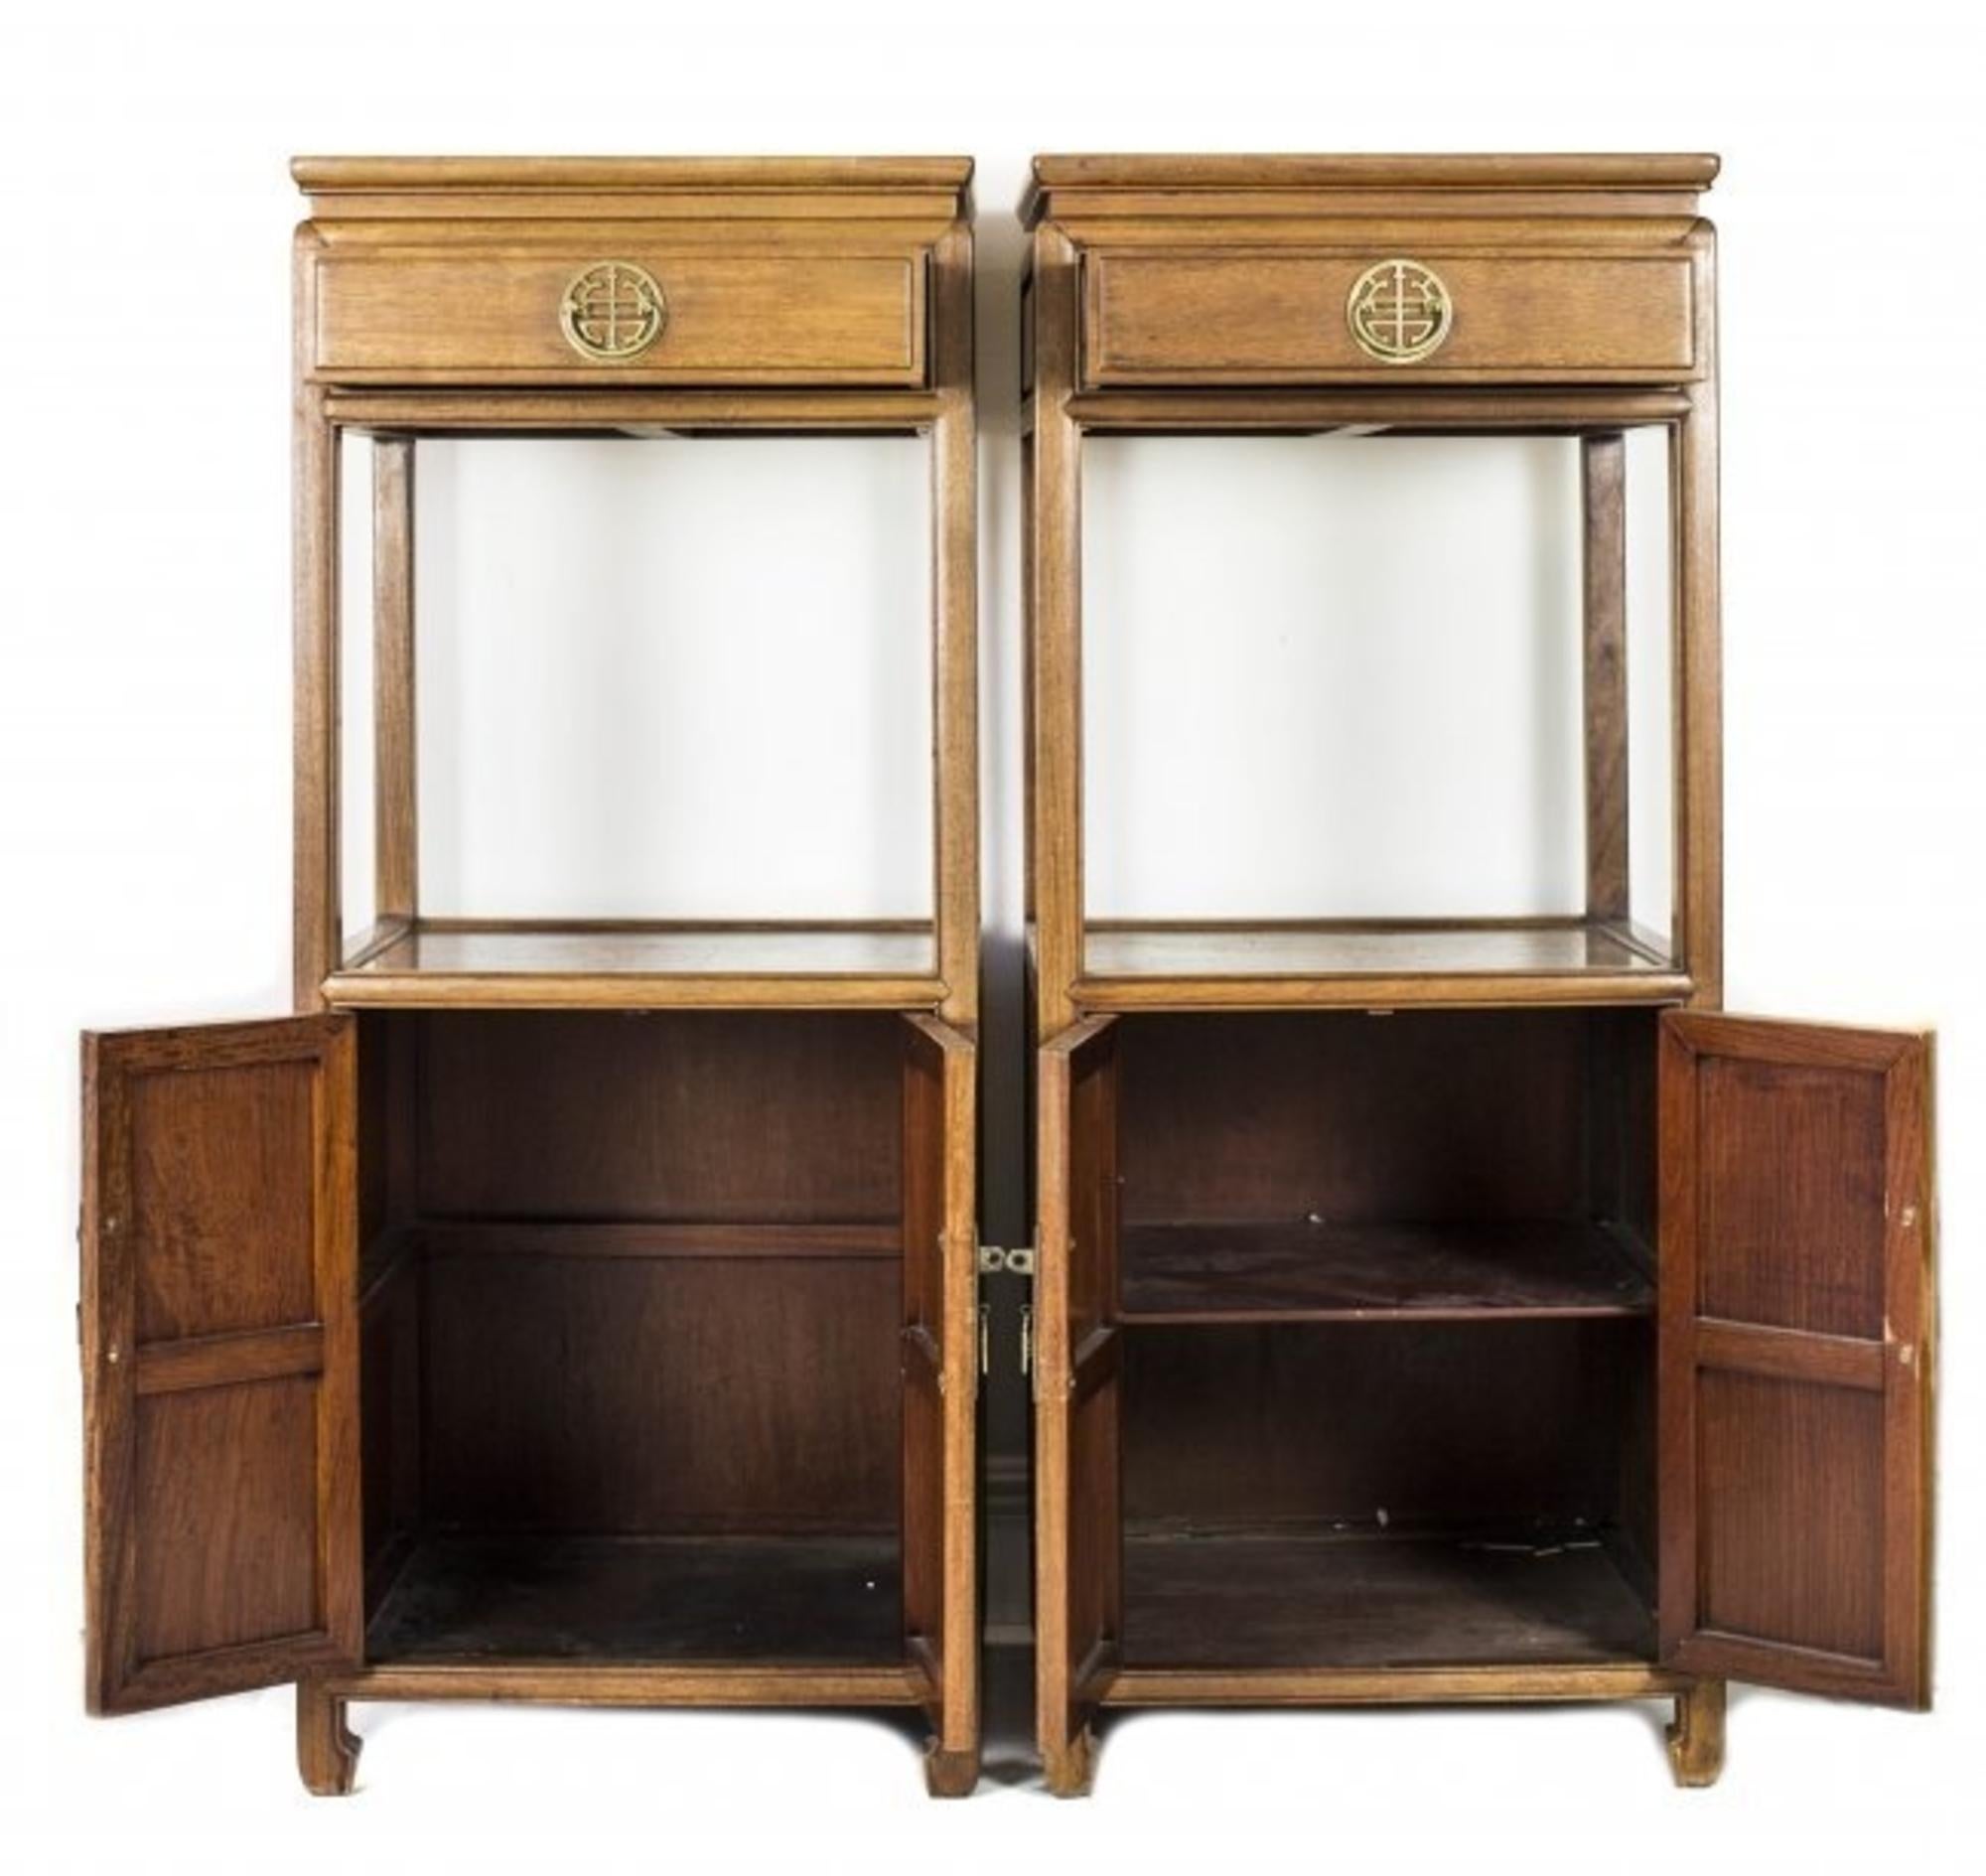 Pair of Chinese Hong-Mu pedestal cabinets
Each of rectangular form fitted with an upper drawer and a pair of cupboard doors.

Measures: Height 4 ft. by 2 in.,
Width 21 in., Depth 19 in.